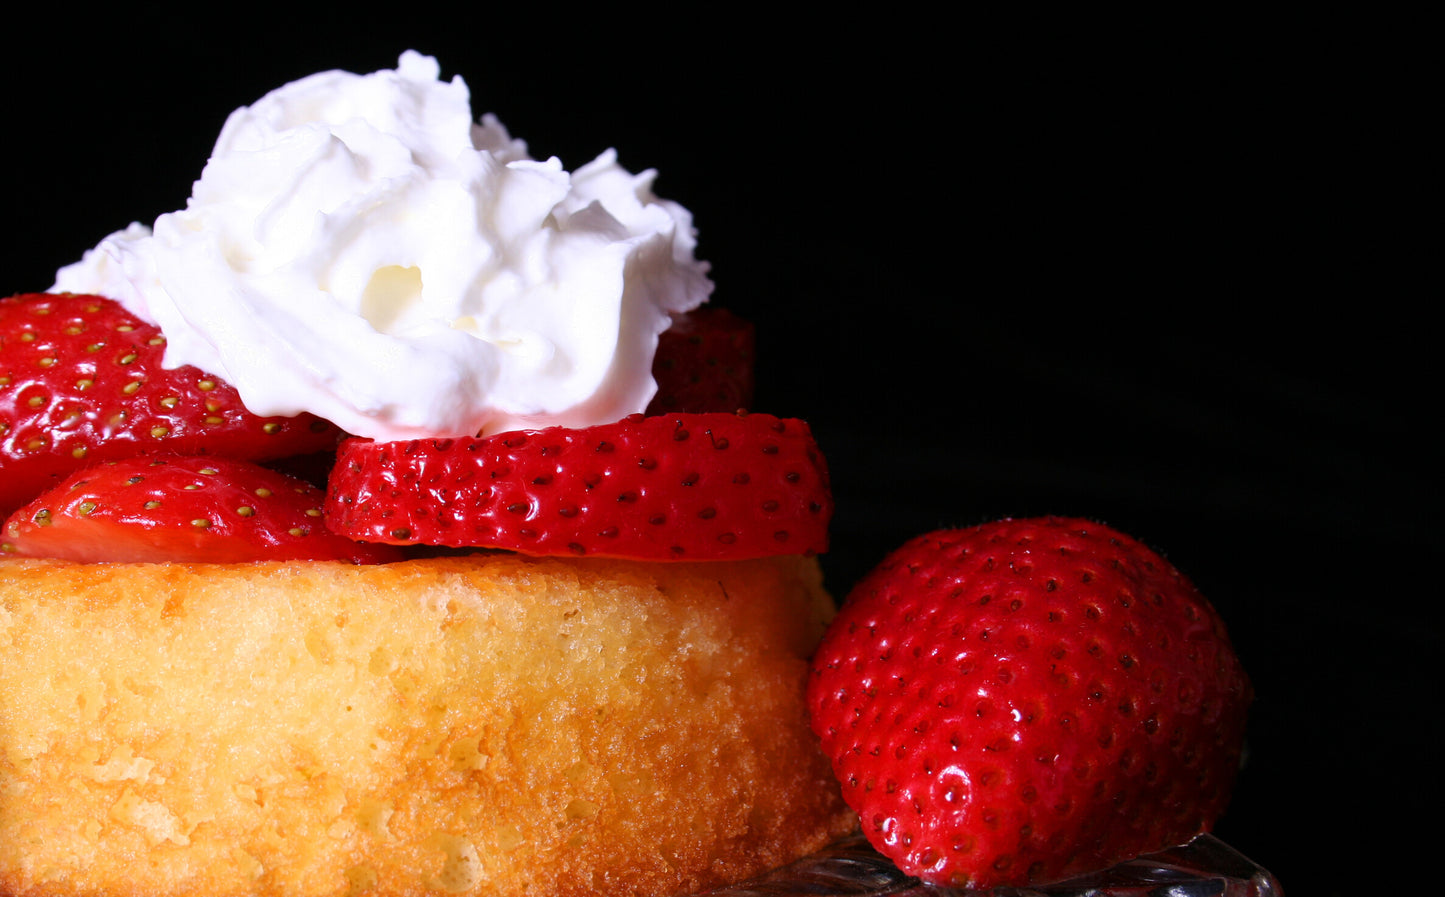 STRAWBERRY'S SHORTCAKE: The luscious combination of strawberries and cream may take you back to lazy summer days while eating strawberry shortcake.